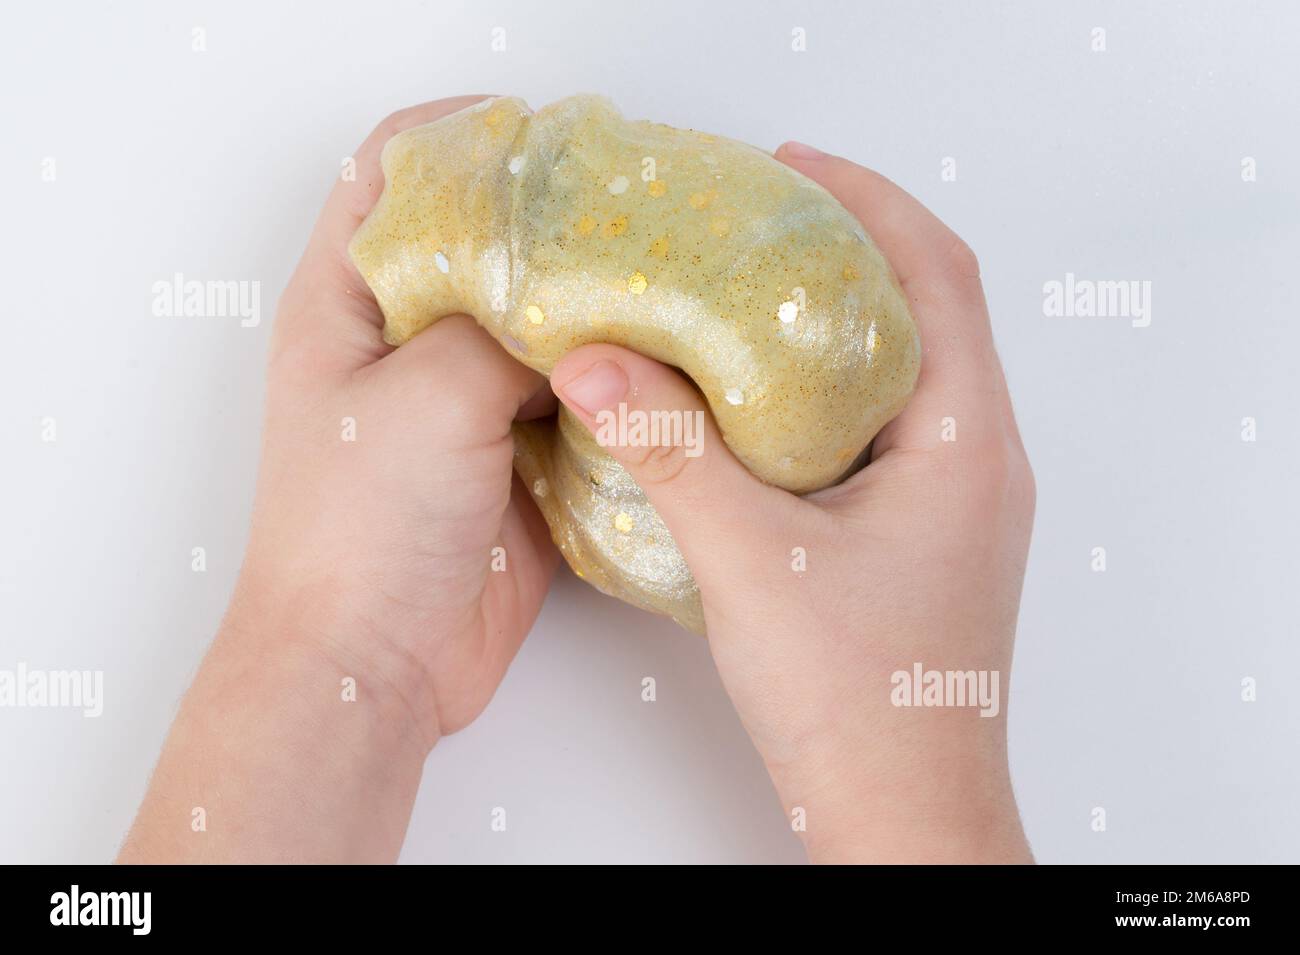 Child playwith colorful slime close up view isolated Stock Photo